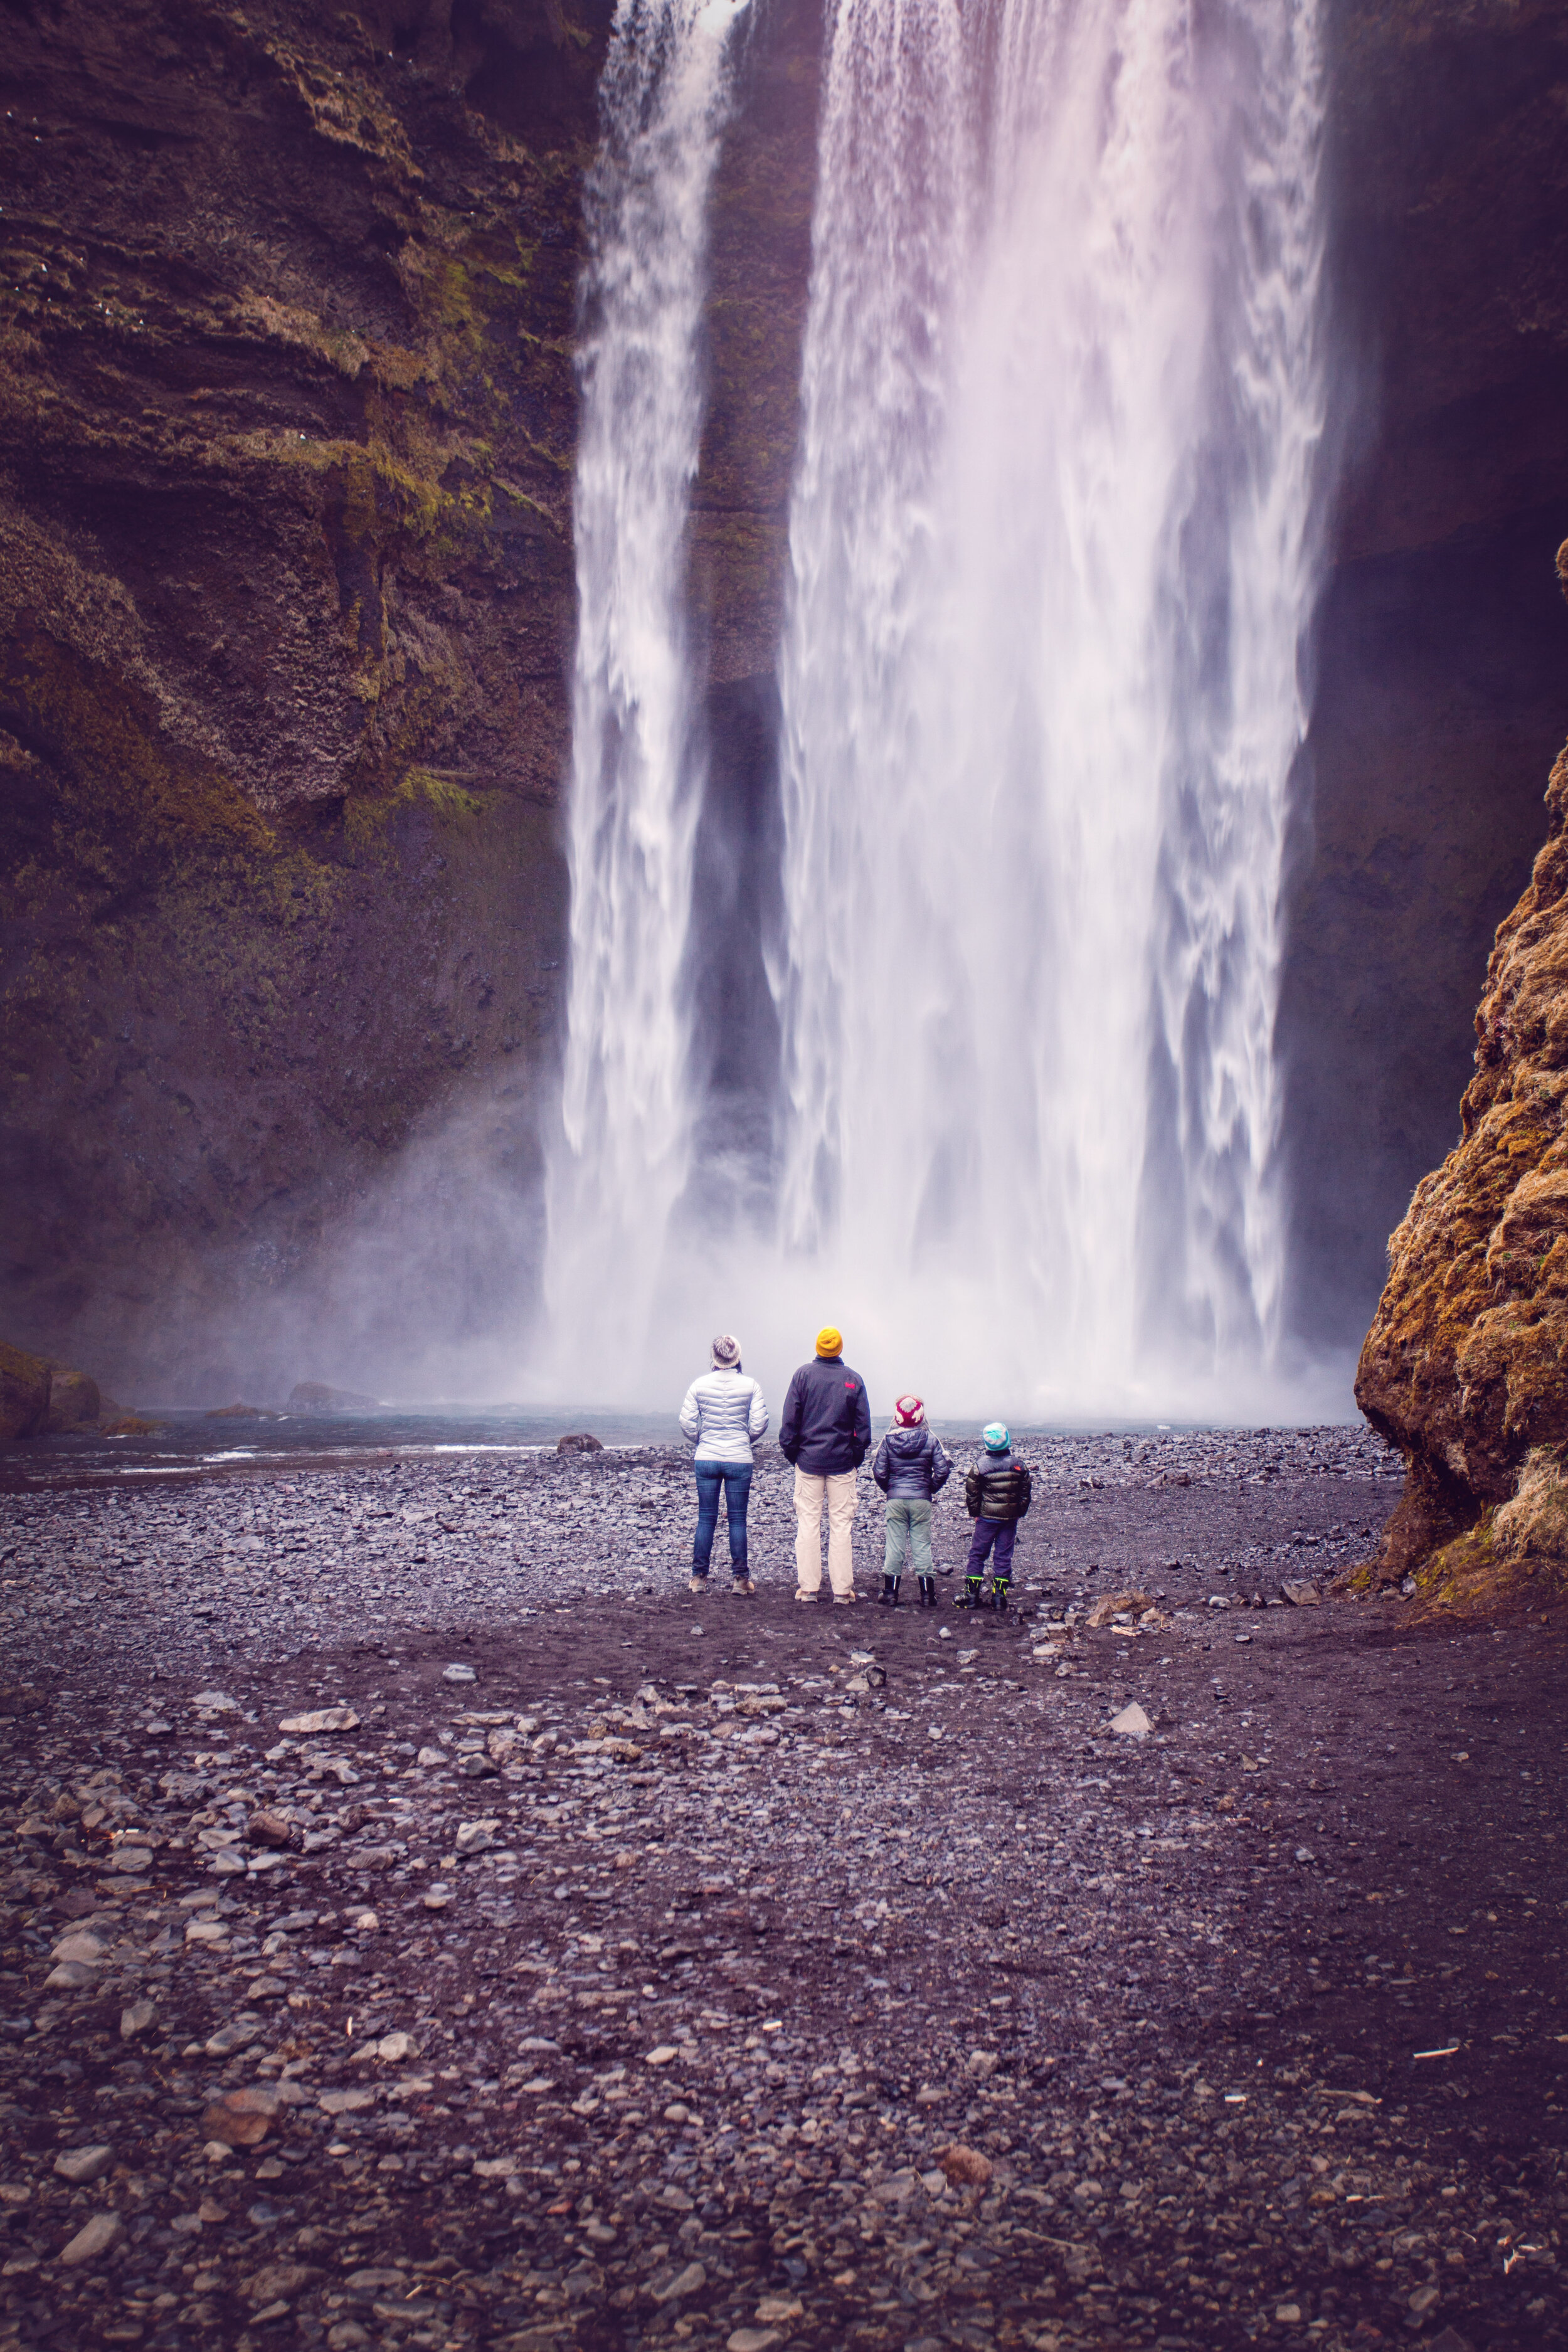 Brent, the kids and I at the base of the mighty Skogafoss in Iceland.